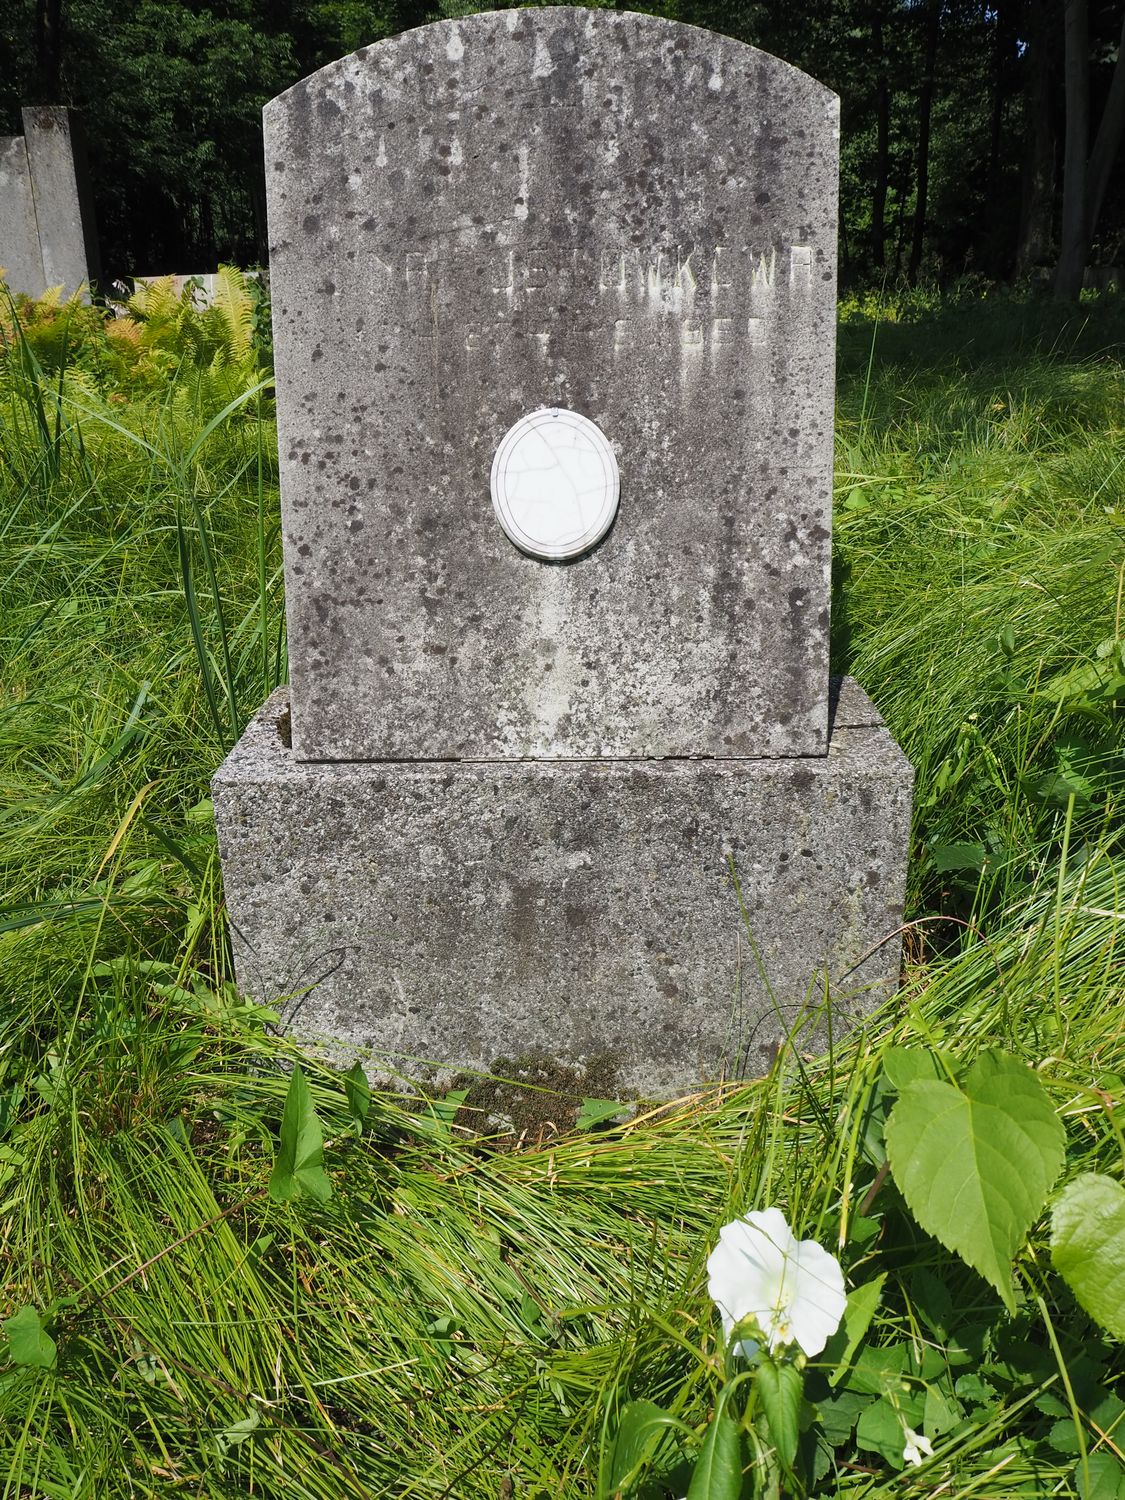 Tombstone of Anna Pustovka, cemetery in Karviná Mexico, as of 2022.